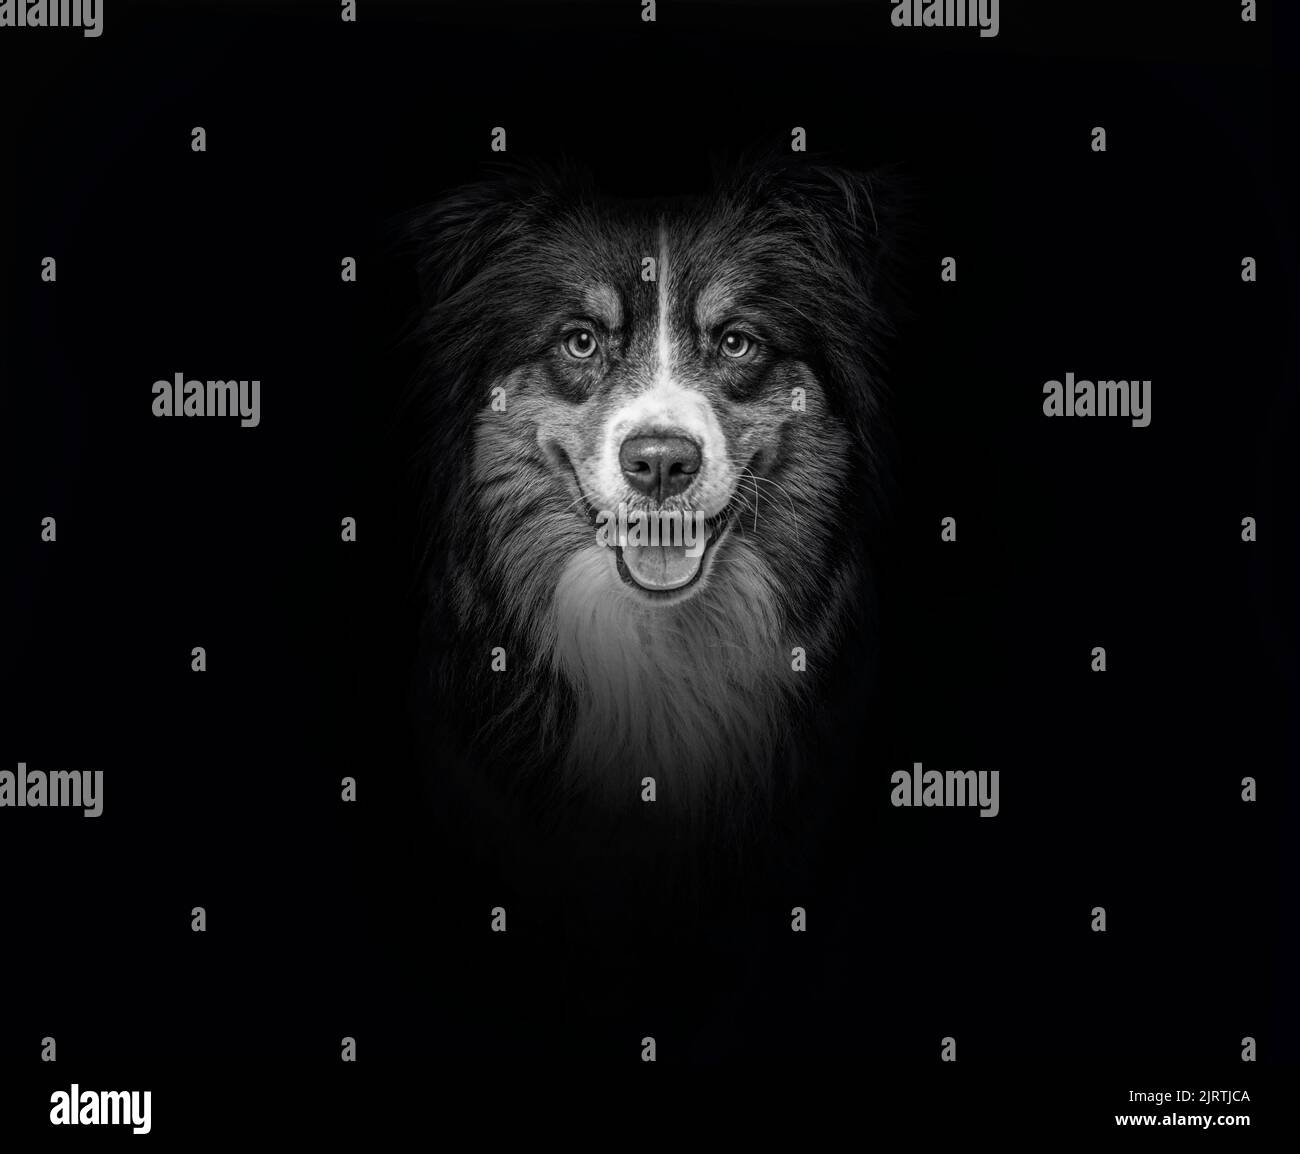 Black and white Head shot of a Red tri-color Australian Shepherd panting on black background Stock Photo